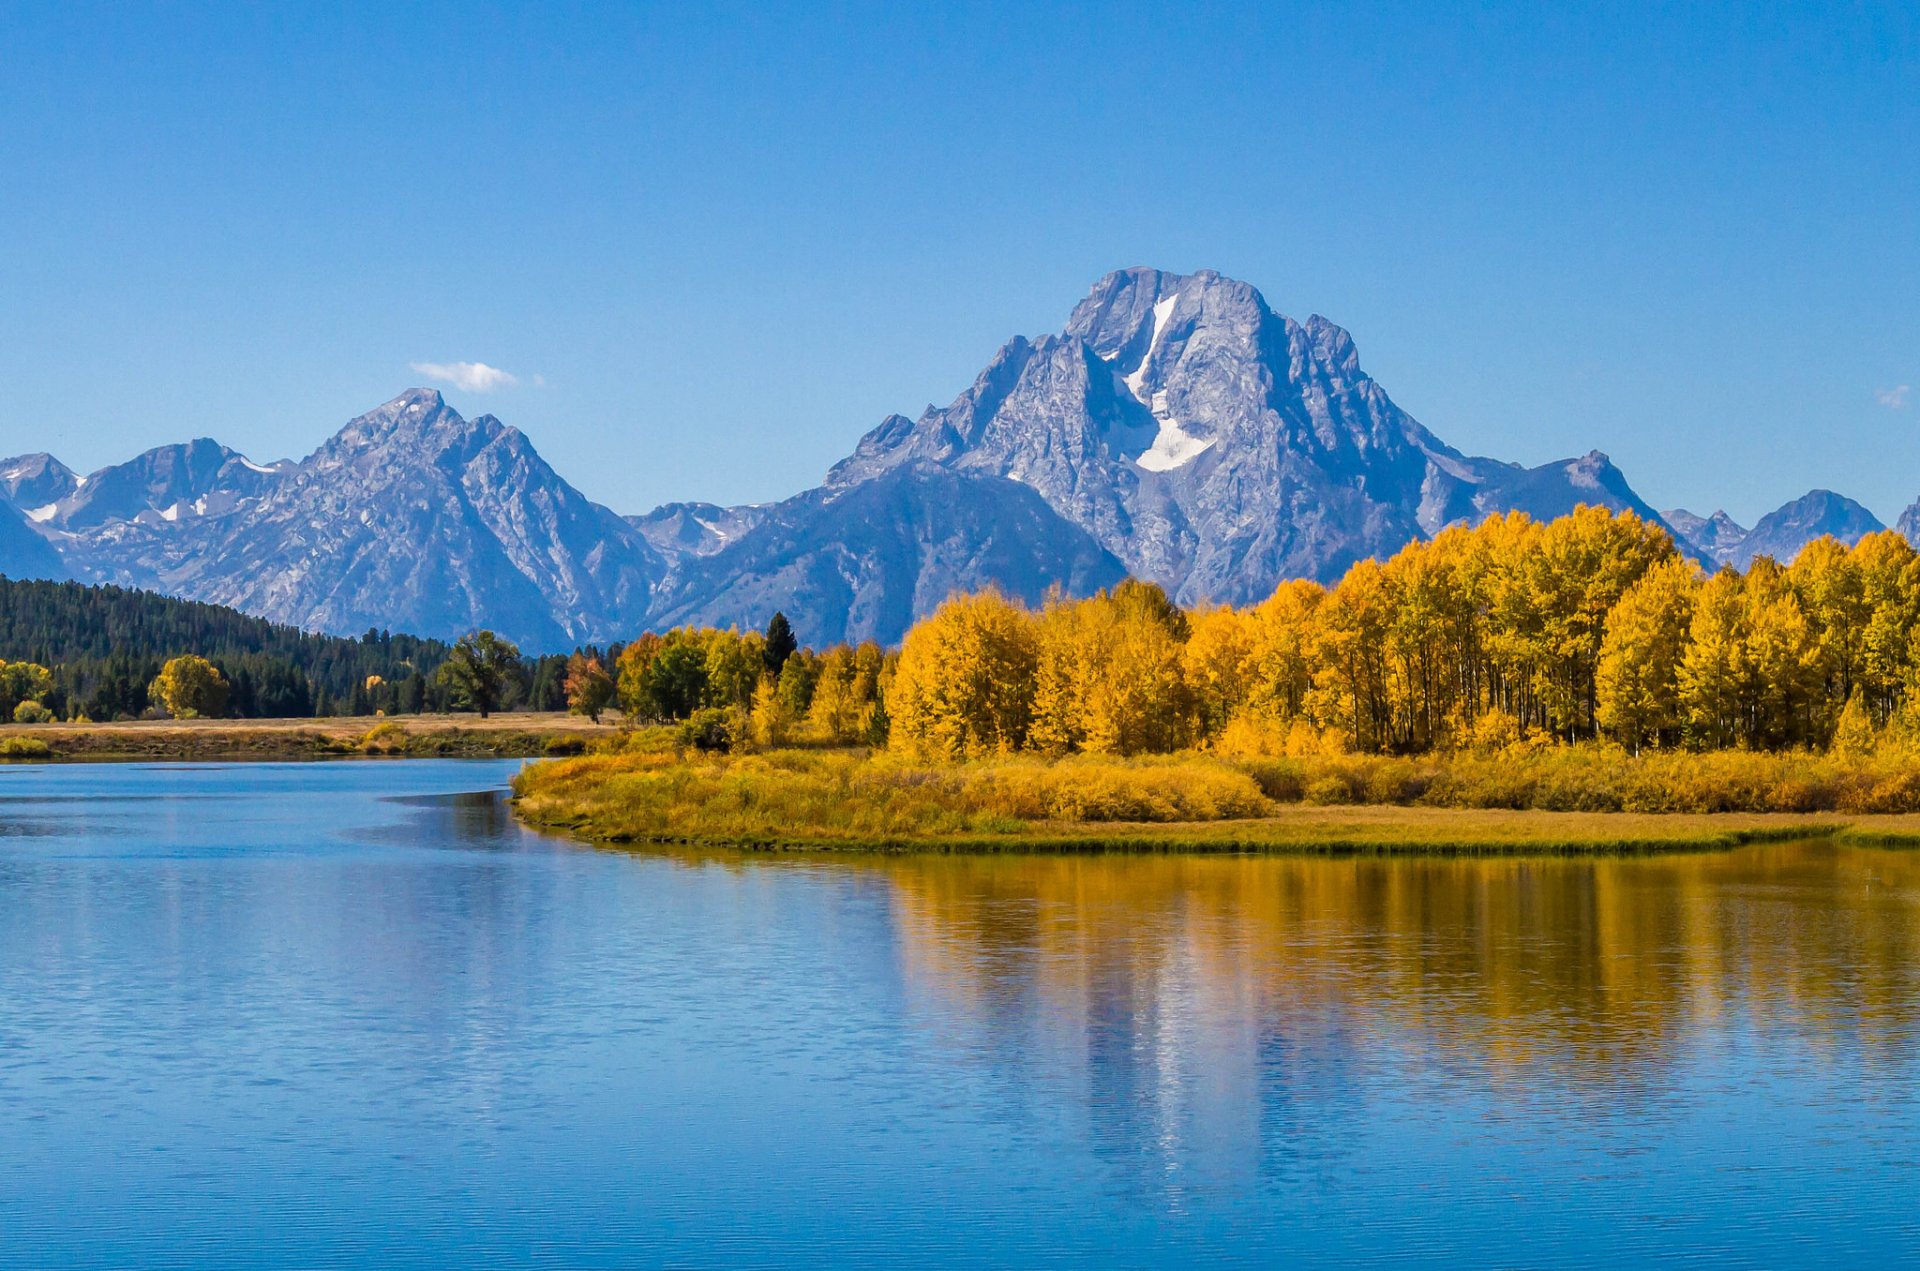 Hd Wallpaper Grand Teton National Park Wyoming United States Forest